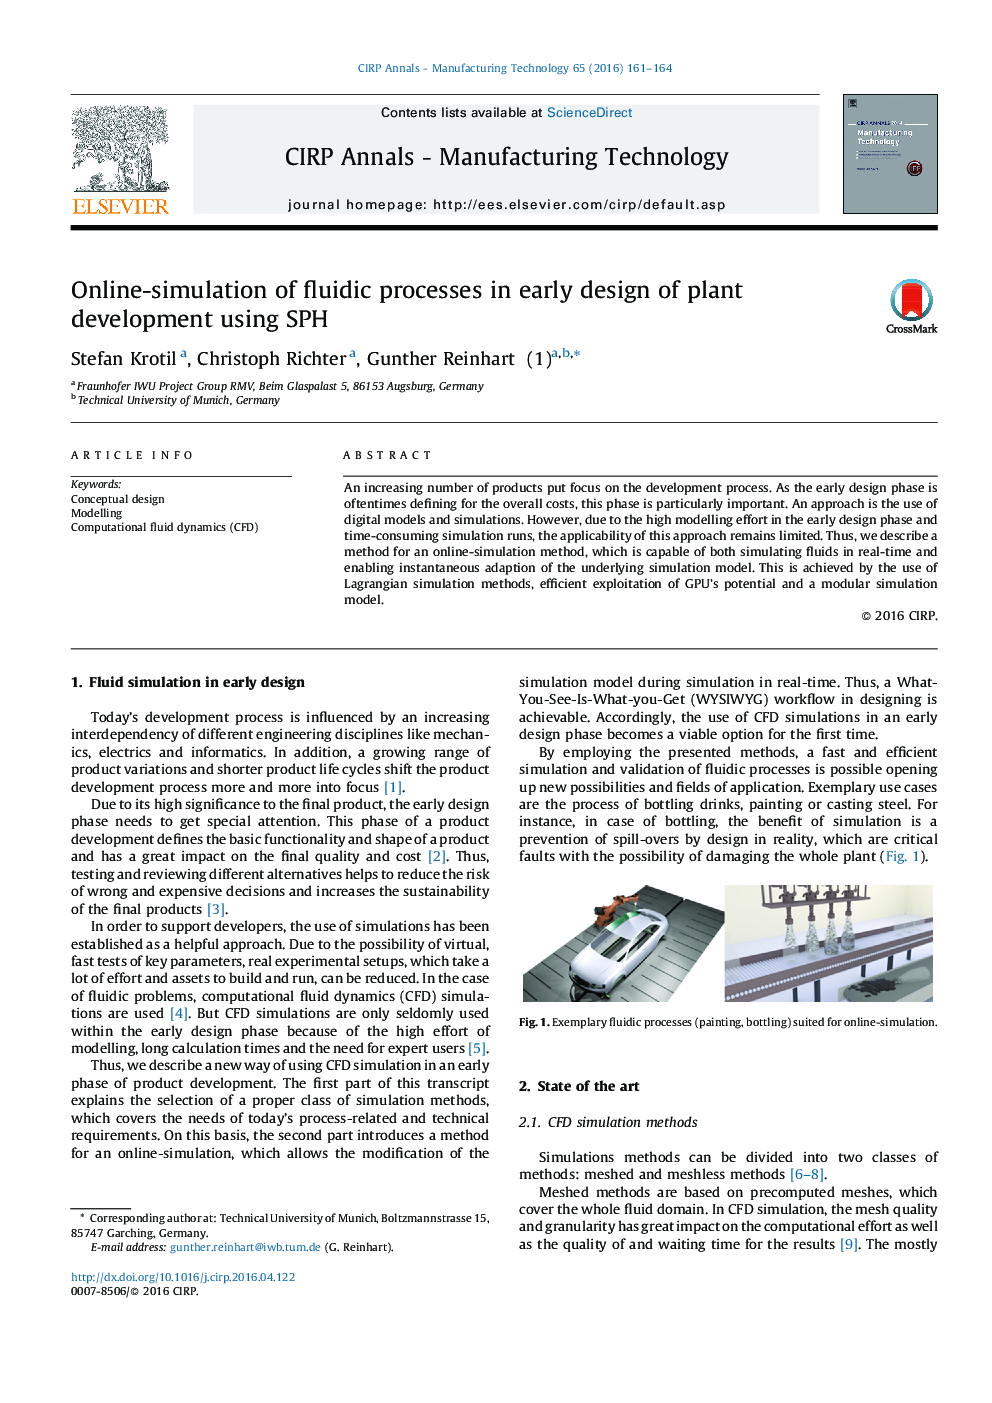 Online-simulation of fluidic processes in early design of plant development using SPH